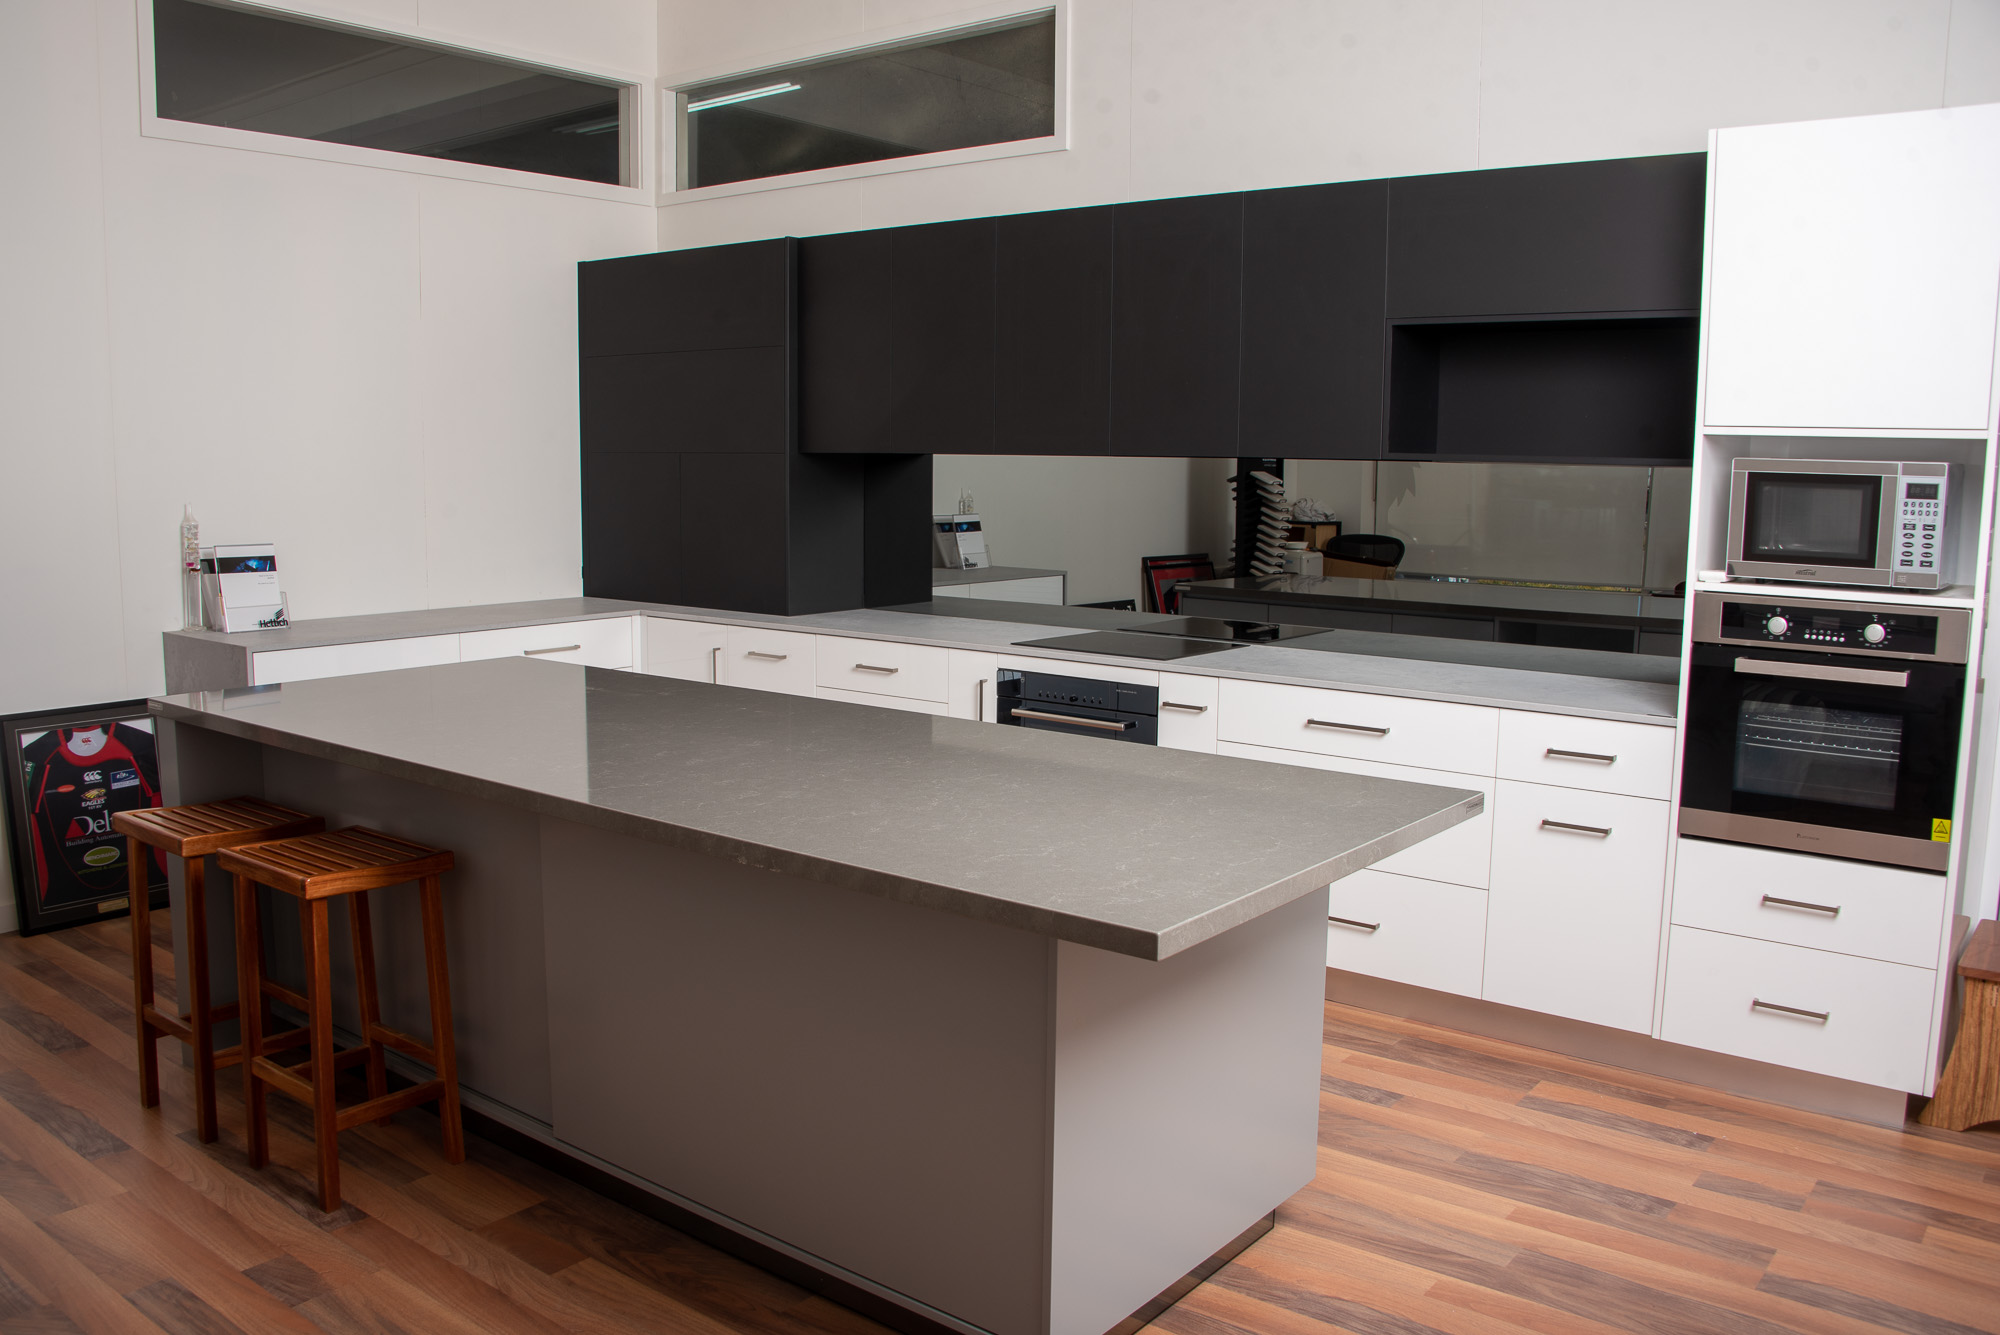 Get Top Quality Canberra Kitchen Design & Renovation With This Expert